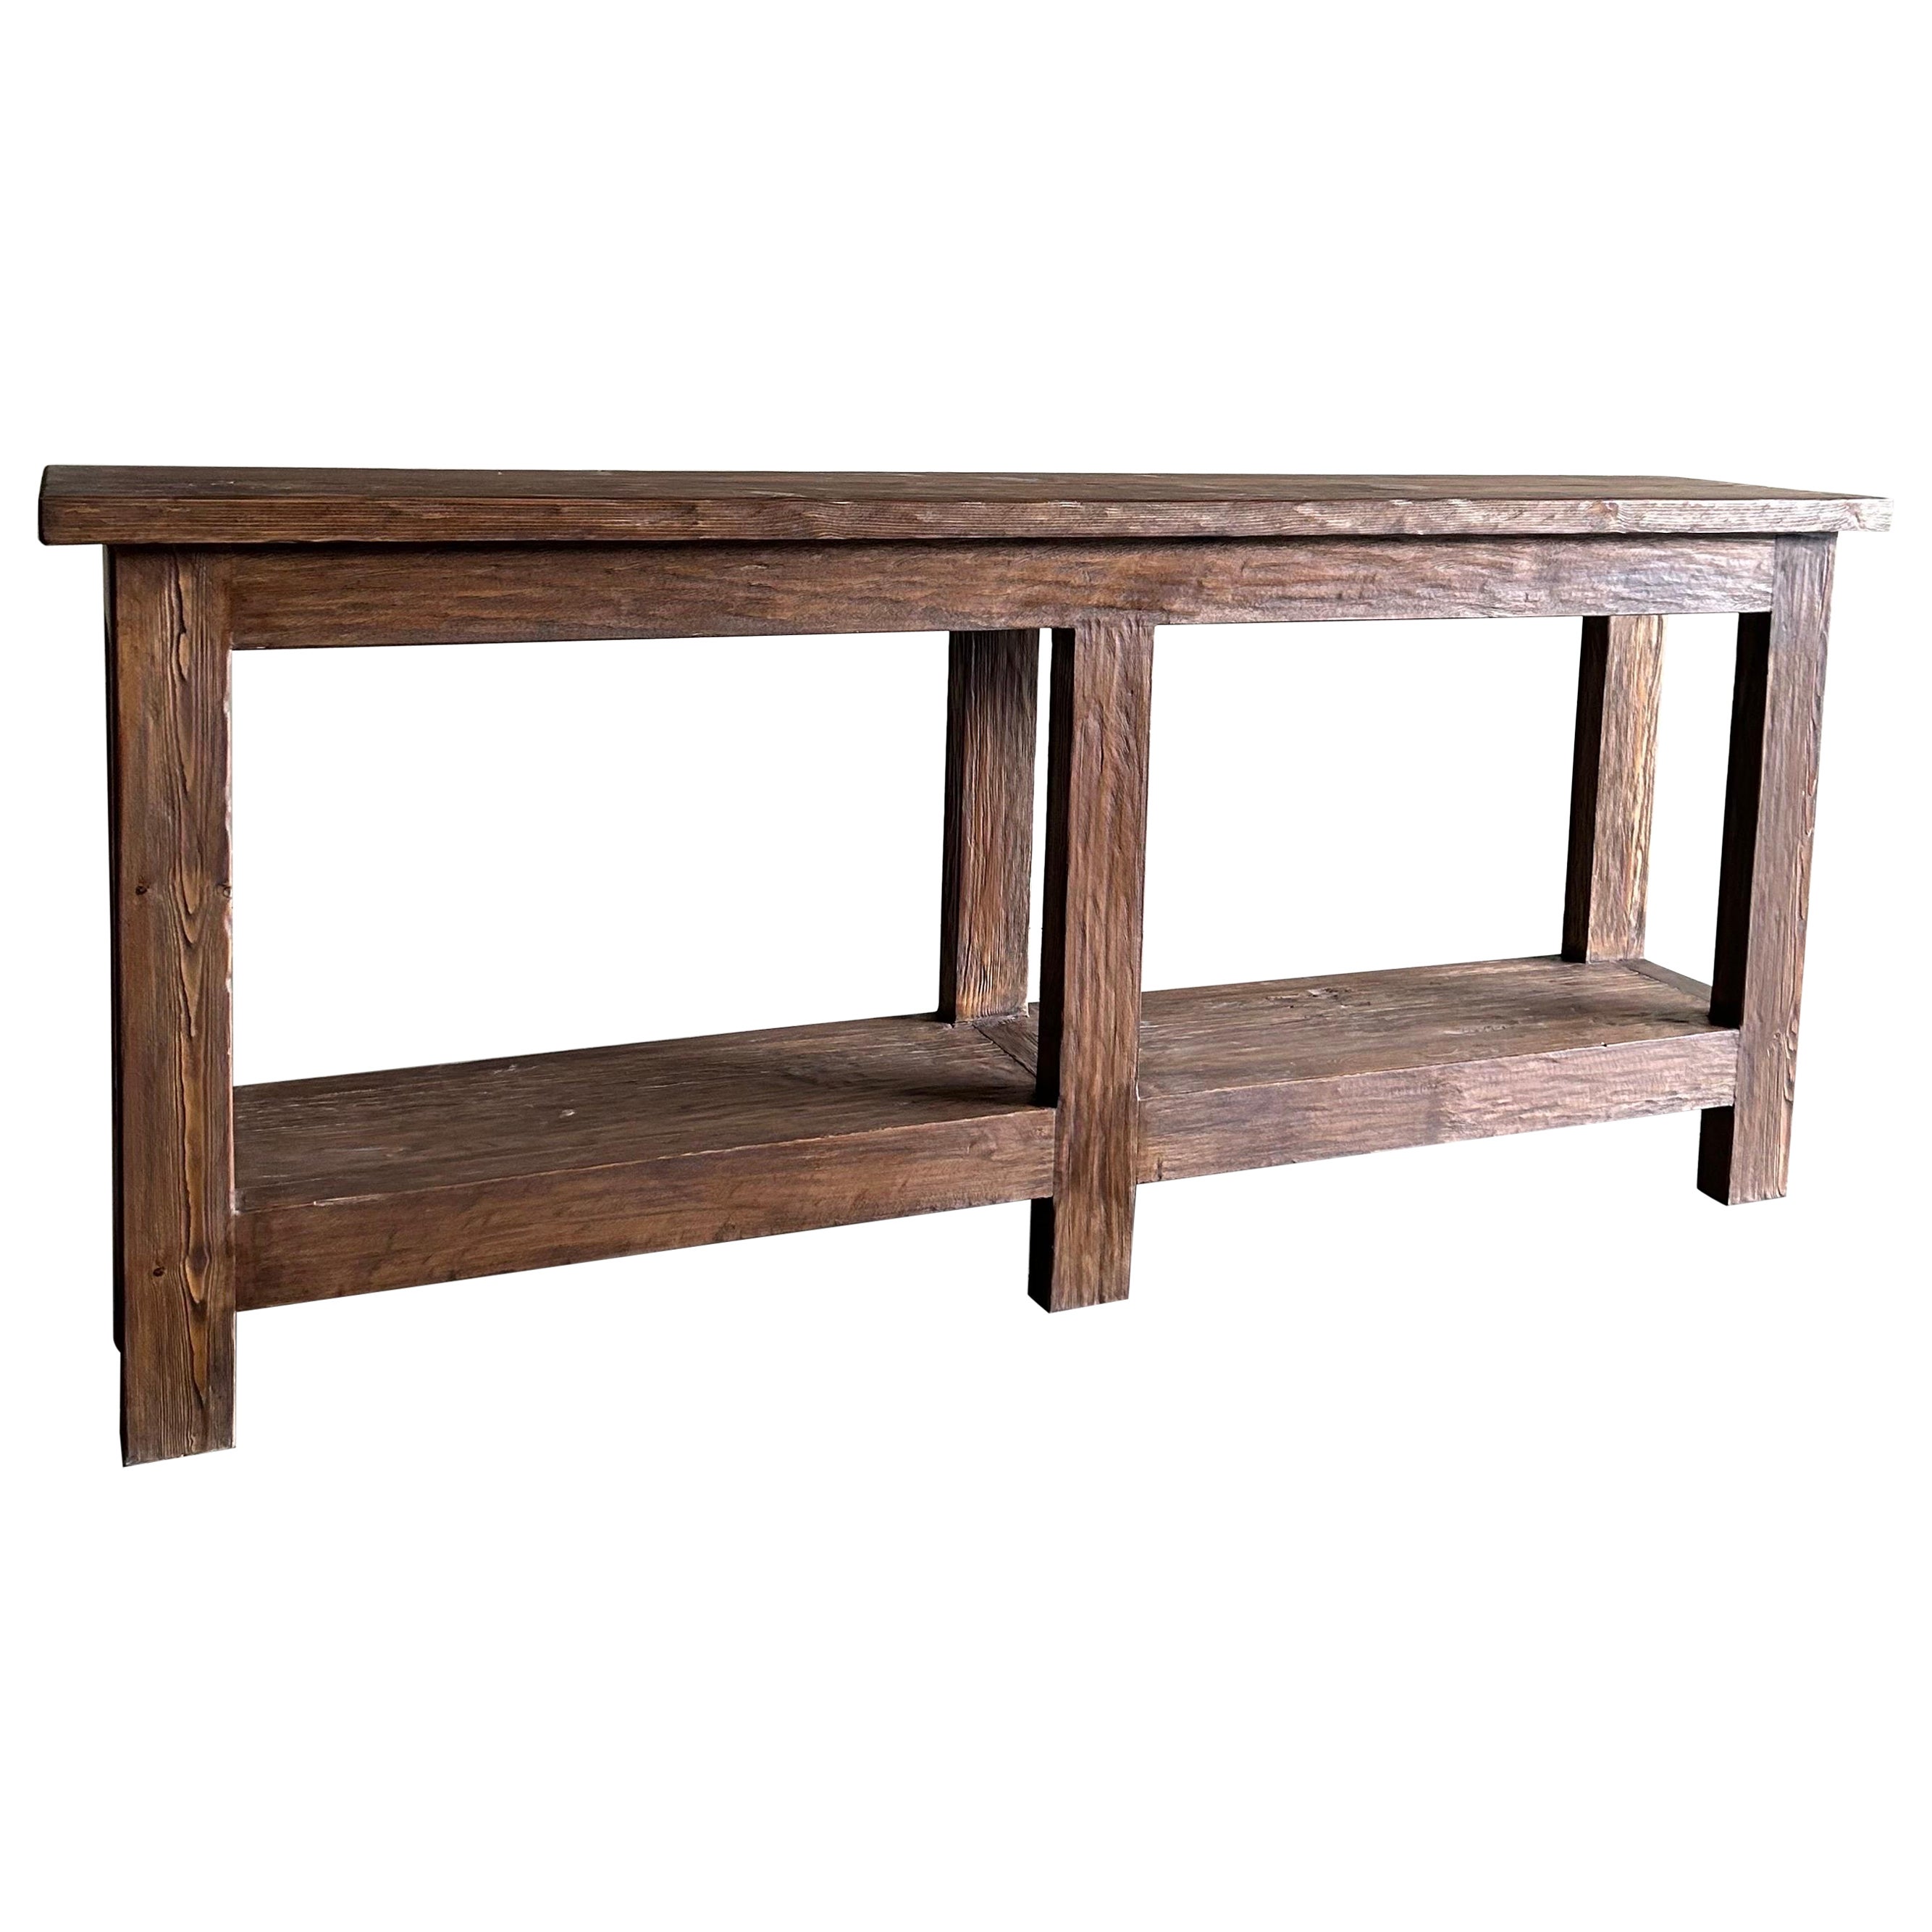 Custom Reclaimed Elm Wood Console Table In Dark Finish with Shelf For Sale